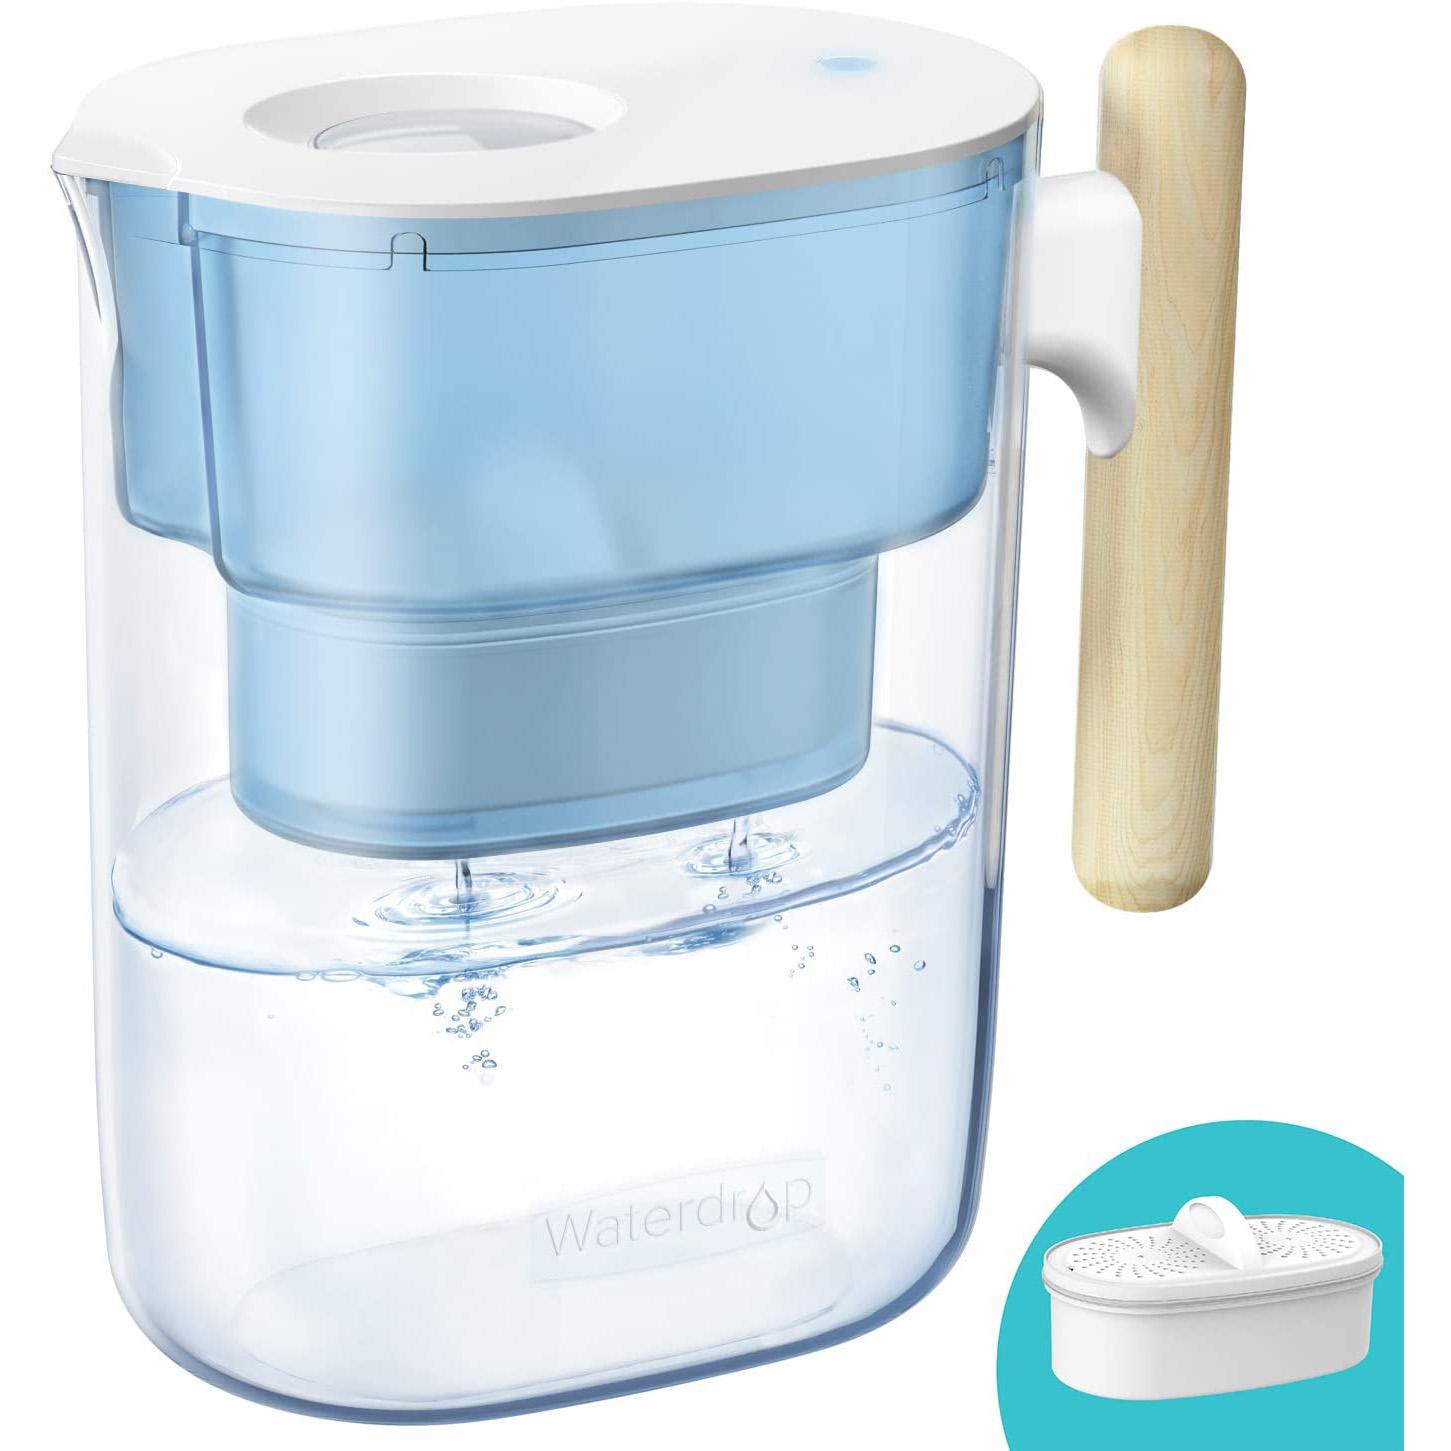 Waterdrop Chubby 10-Cup Water Filter Pitcher for $23.19